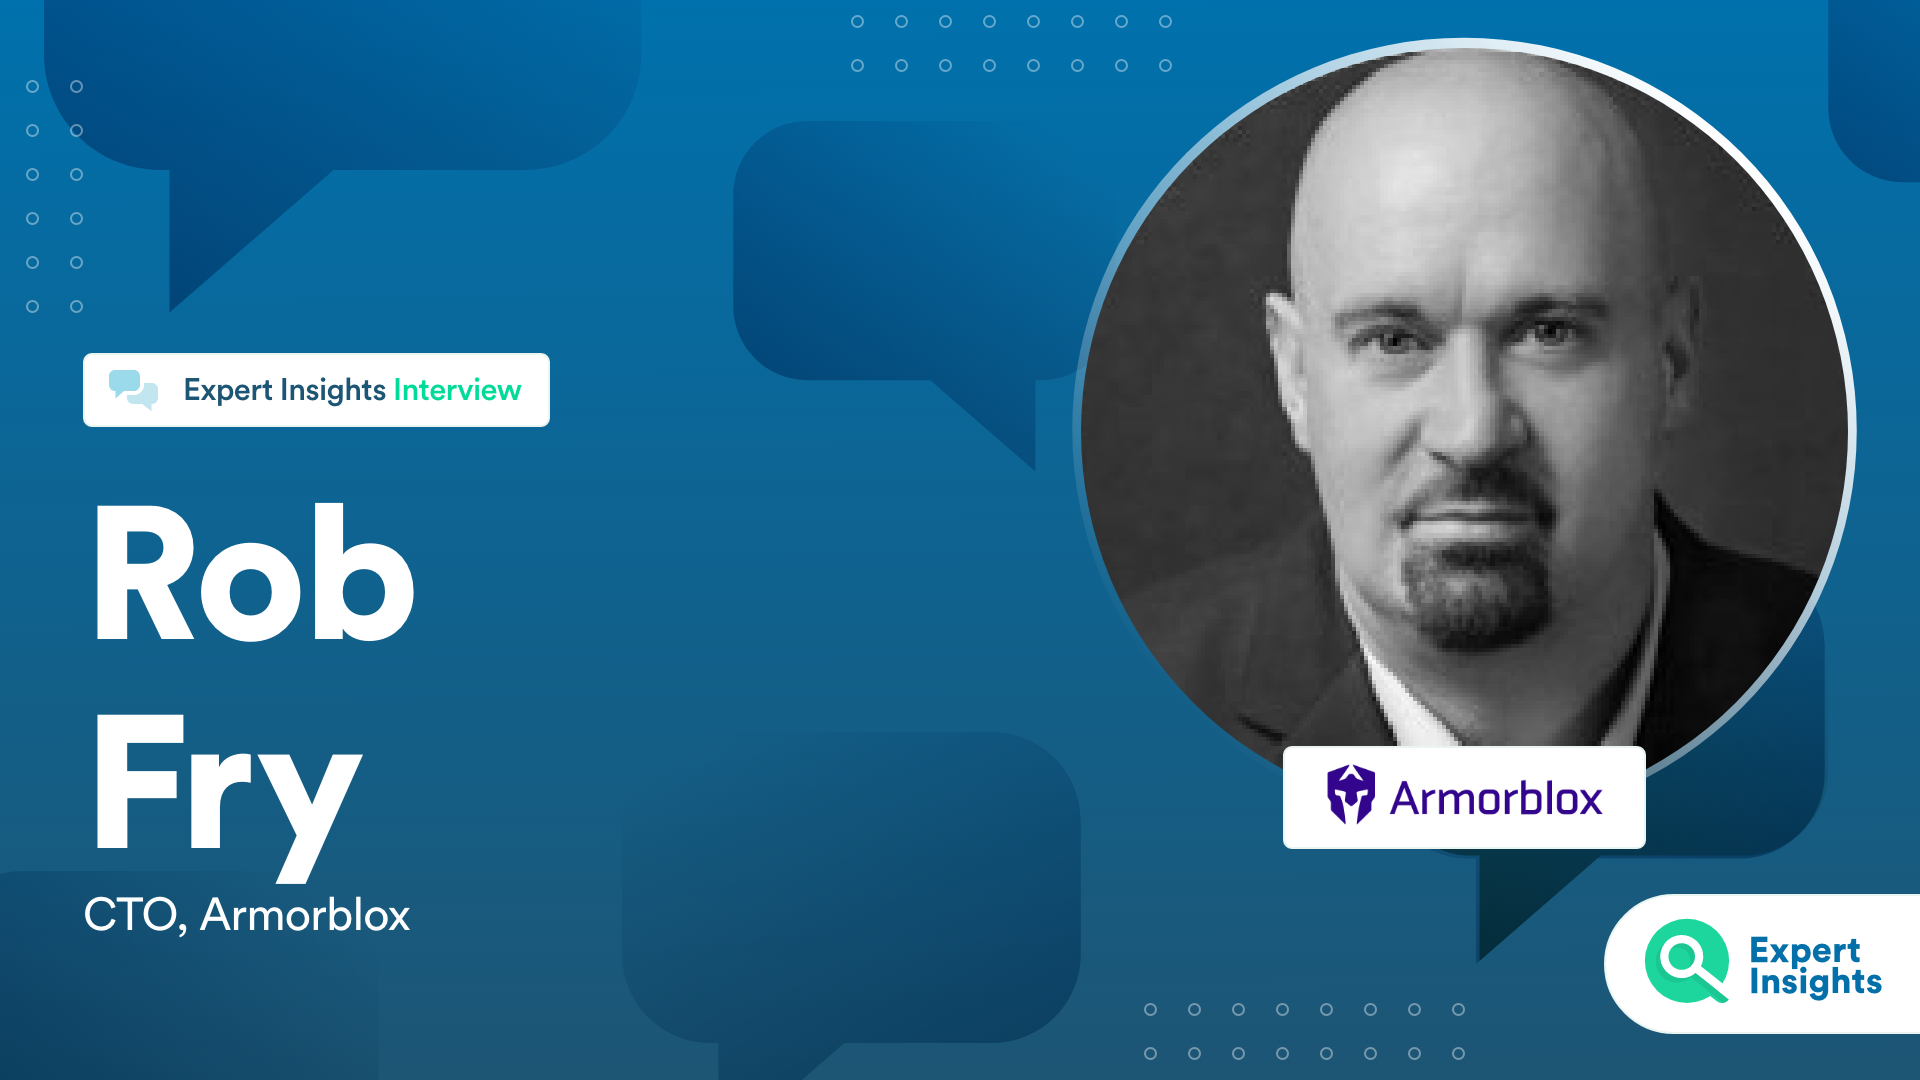 Interview With Rob Fry Of Armorblox - Expert Insights